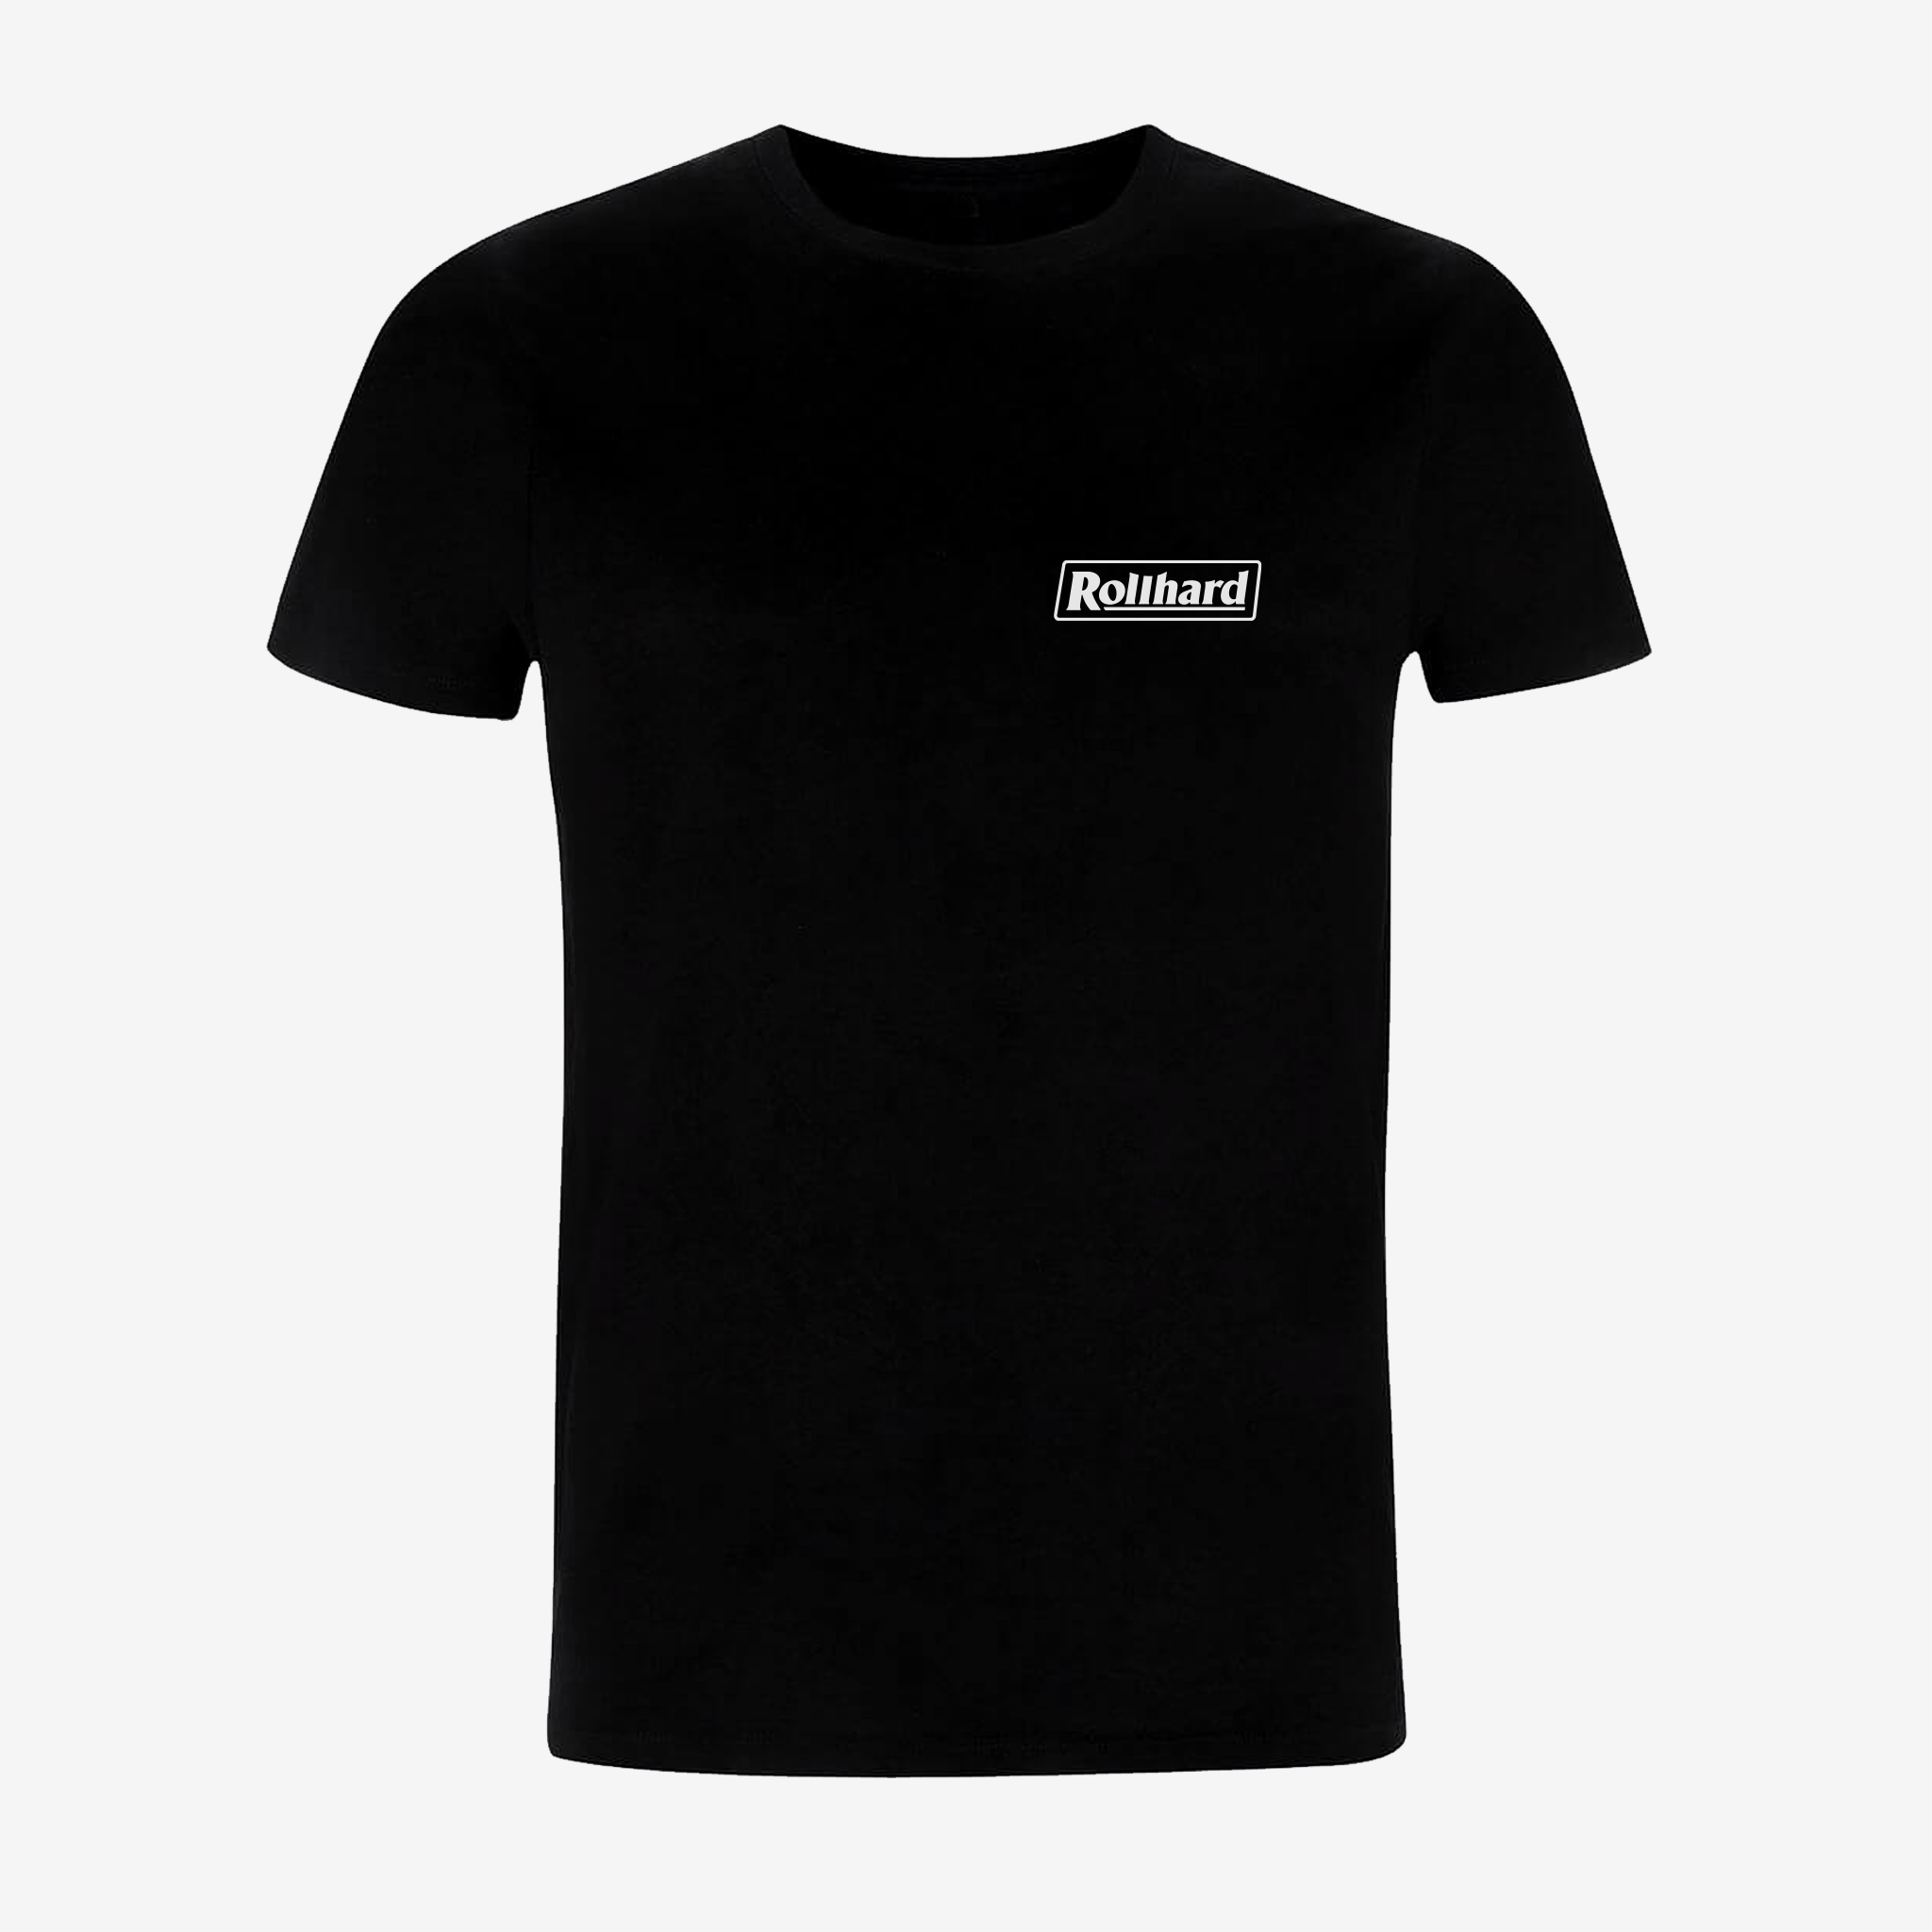 Form and Function T-Shirt - Black